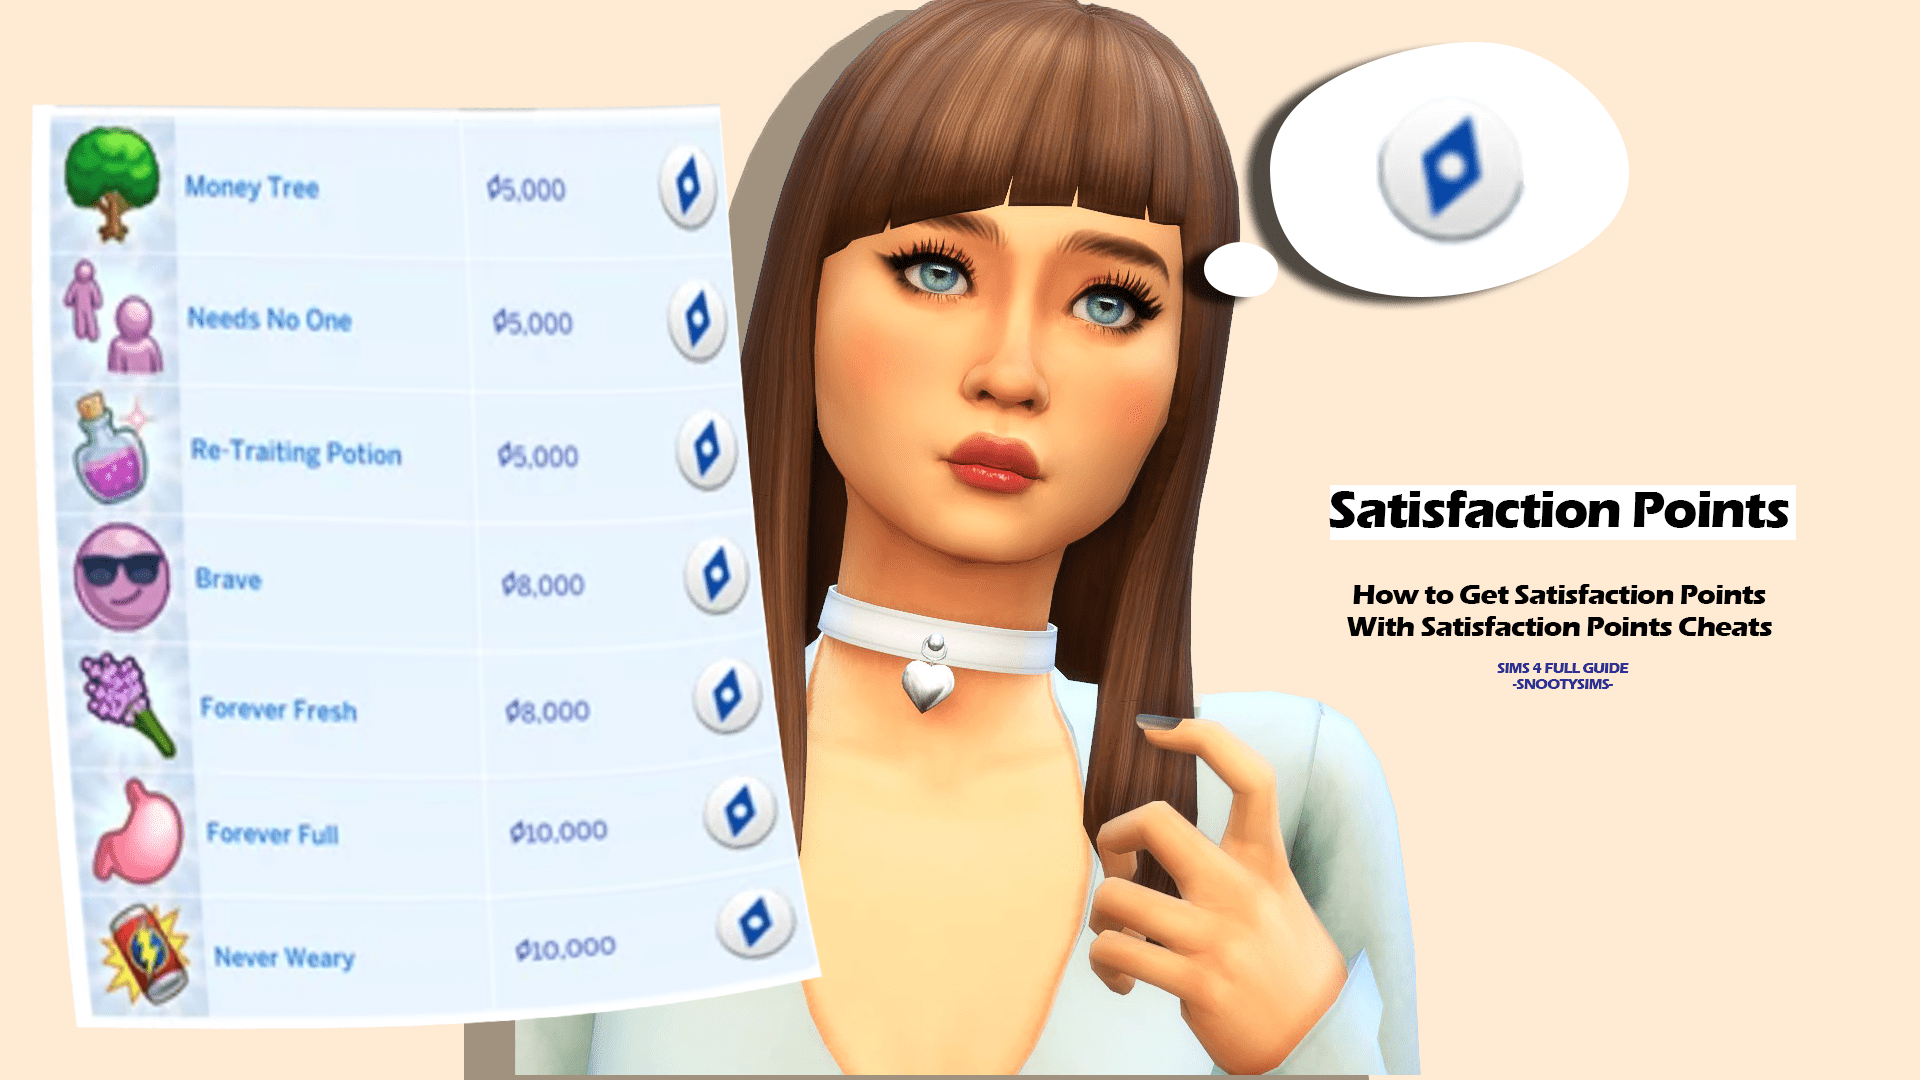 Sims 3: How to get free Lifetime Rewards? (Cheat) 